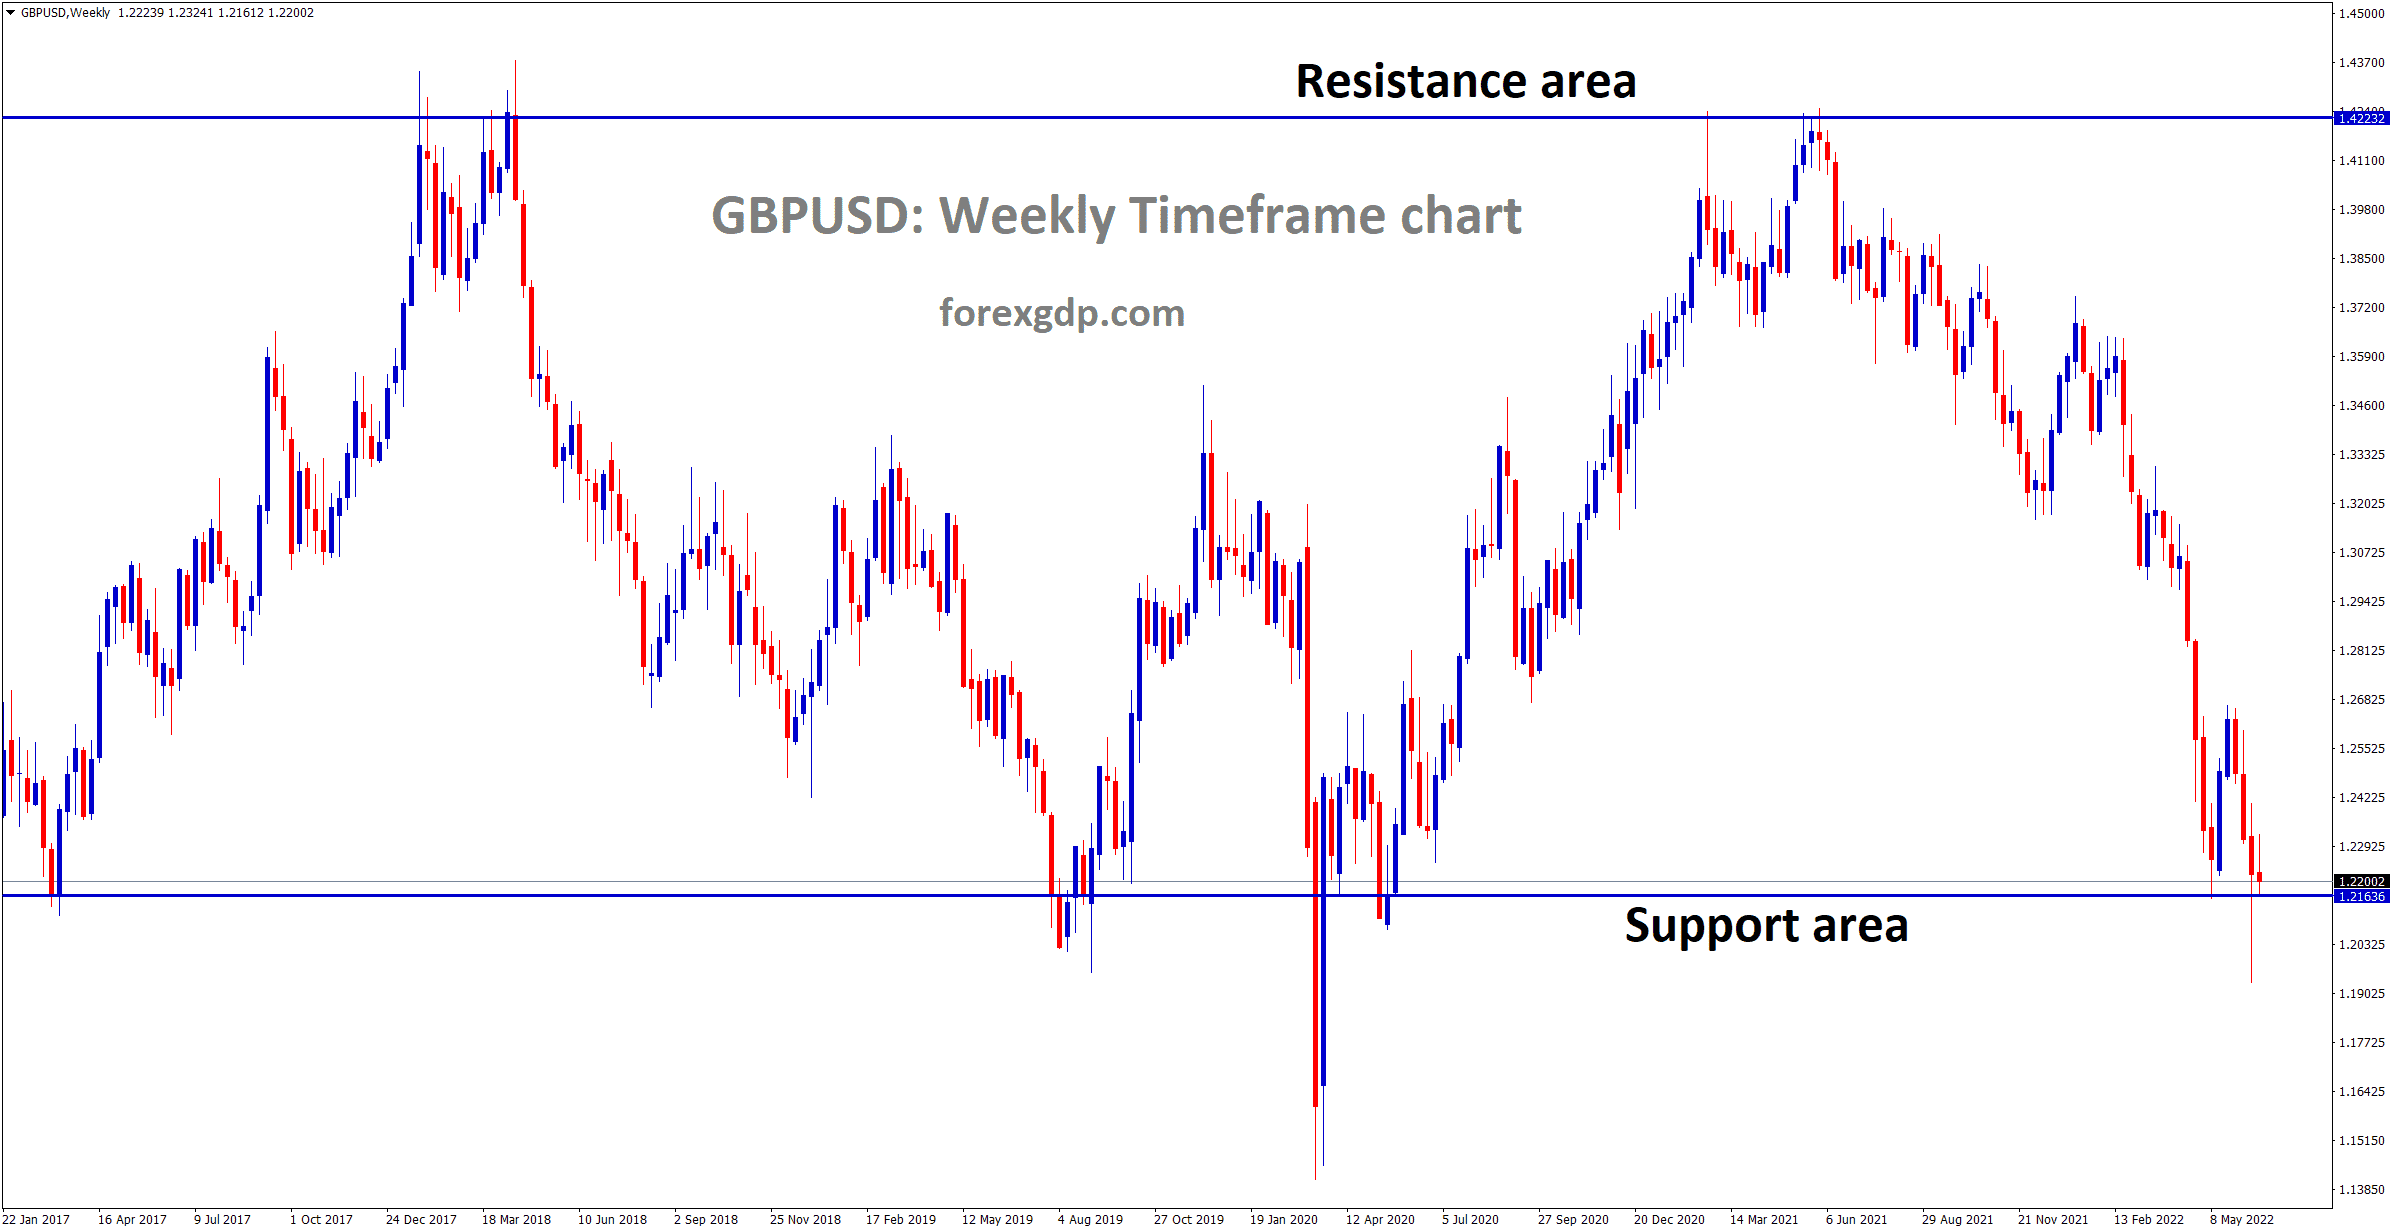 GBPUSD is moving in a box pattern and the market has reached the support area of the pattern